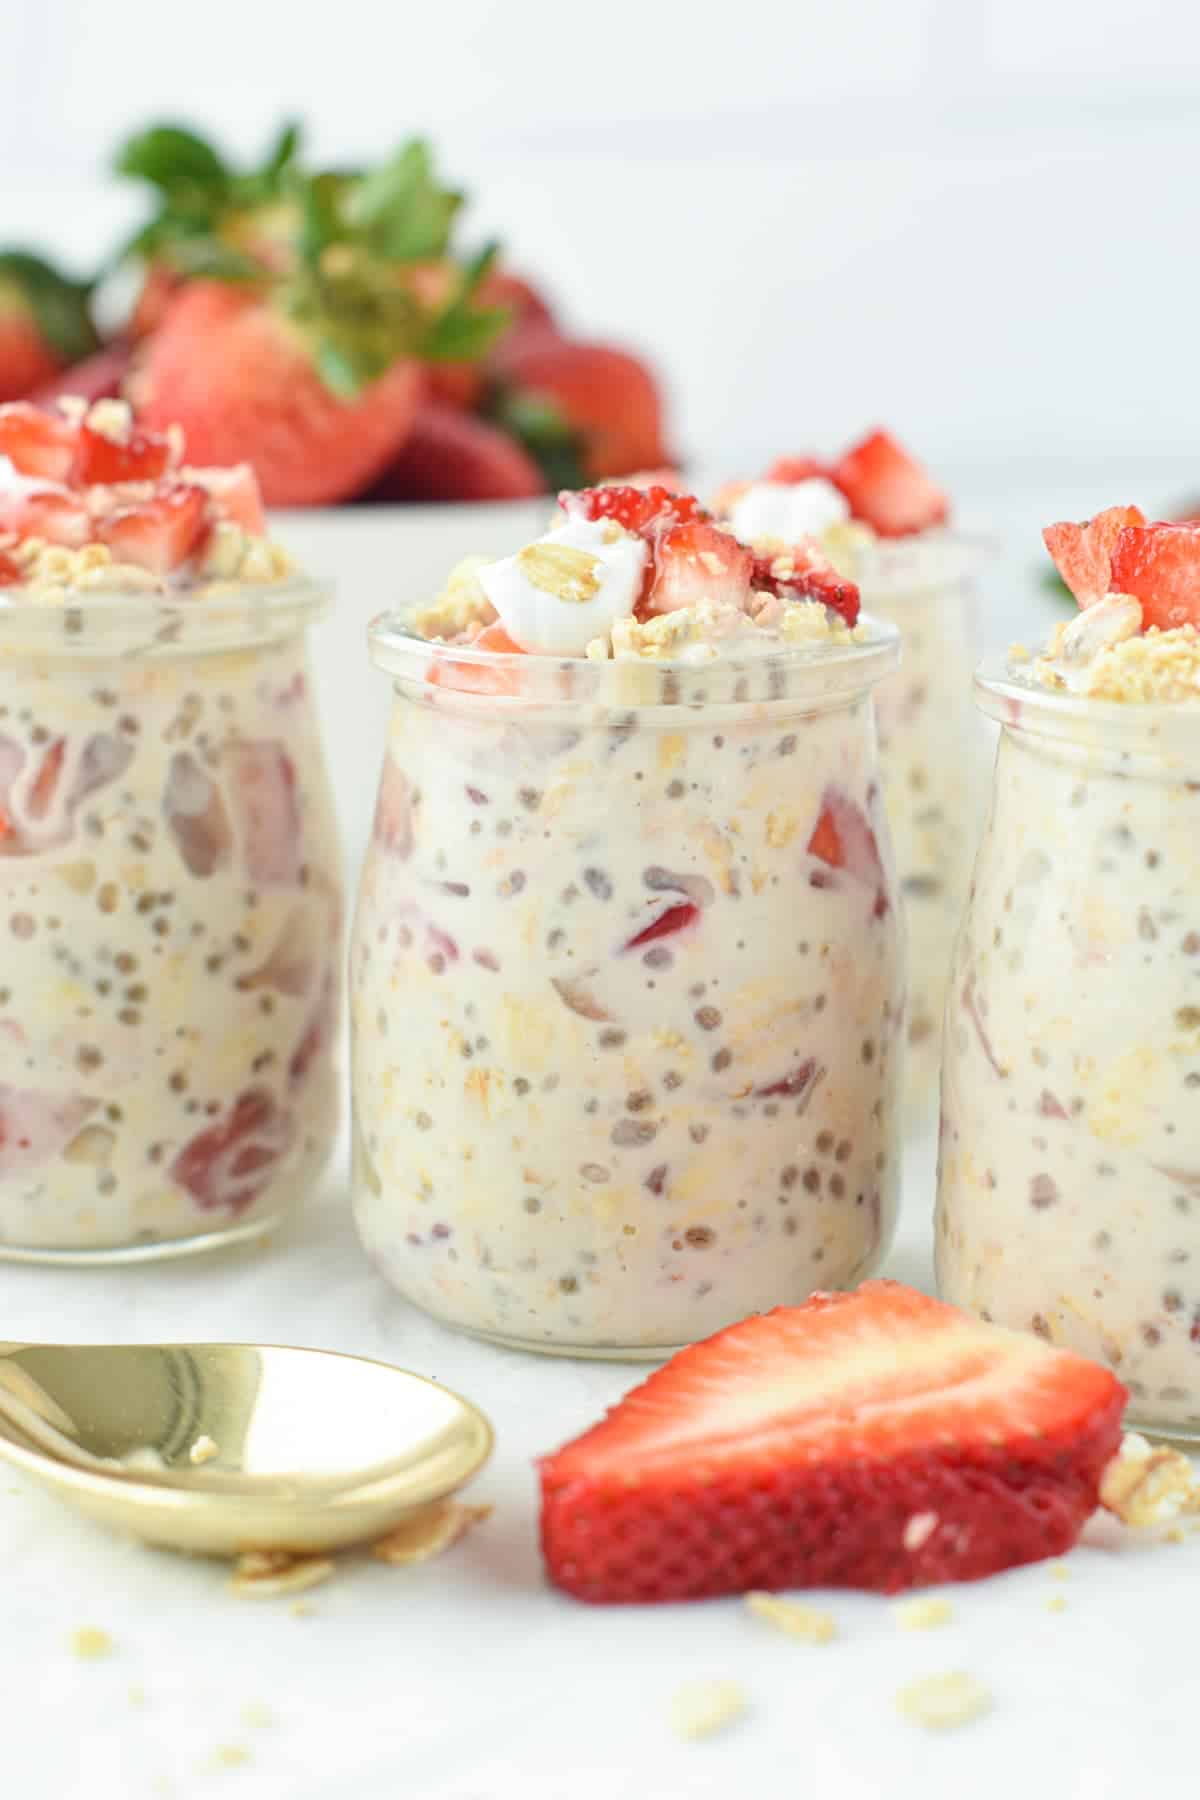 Strawberry Overnight Oats Recipe - Belle of the Kitchen